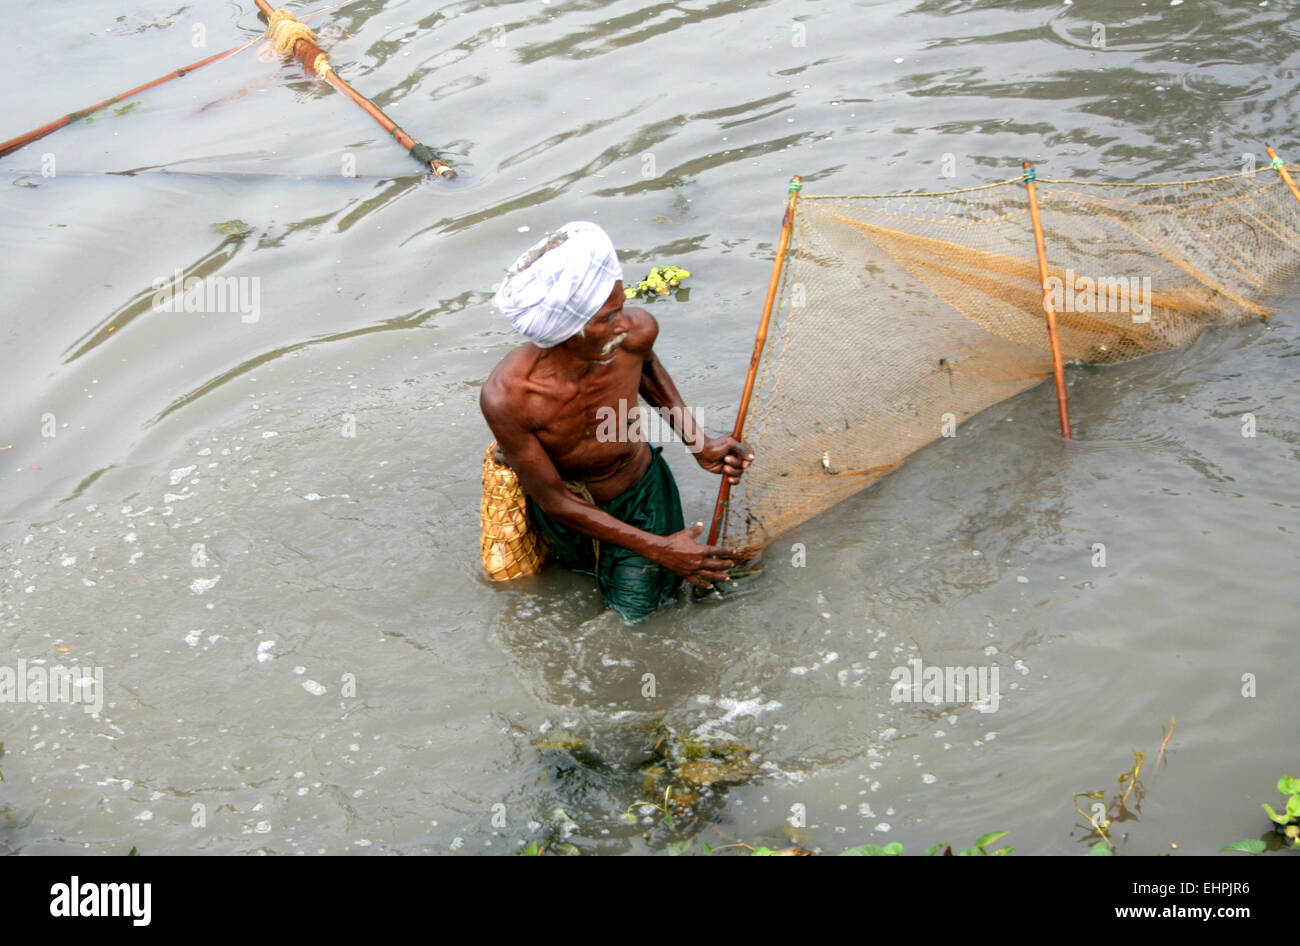 fisherman spread the net in a traditional way to catch fish in irrigation canal water on February 15,2012 in Nandivada,AP,India. Stock Photo